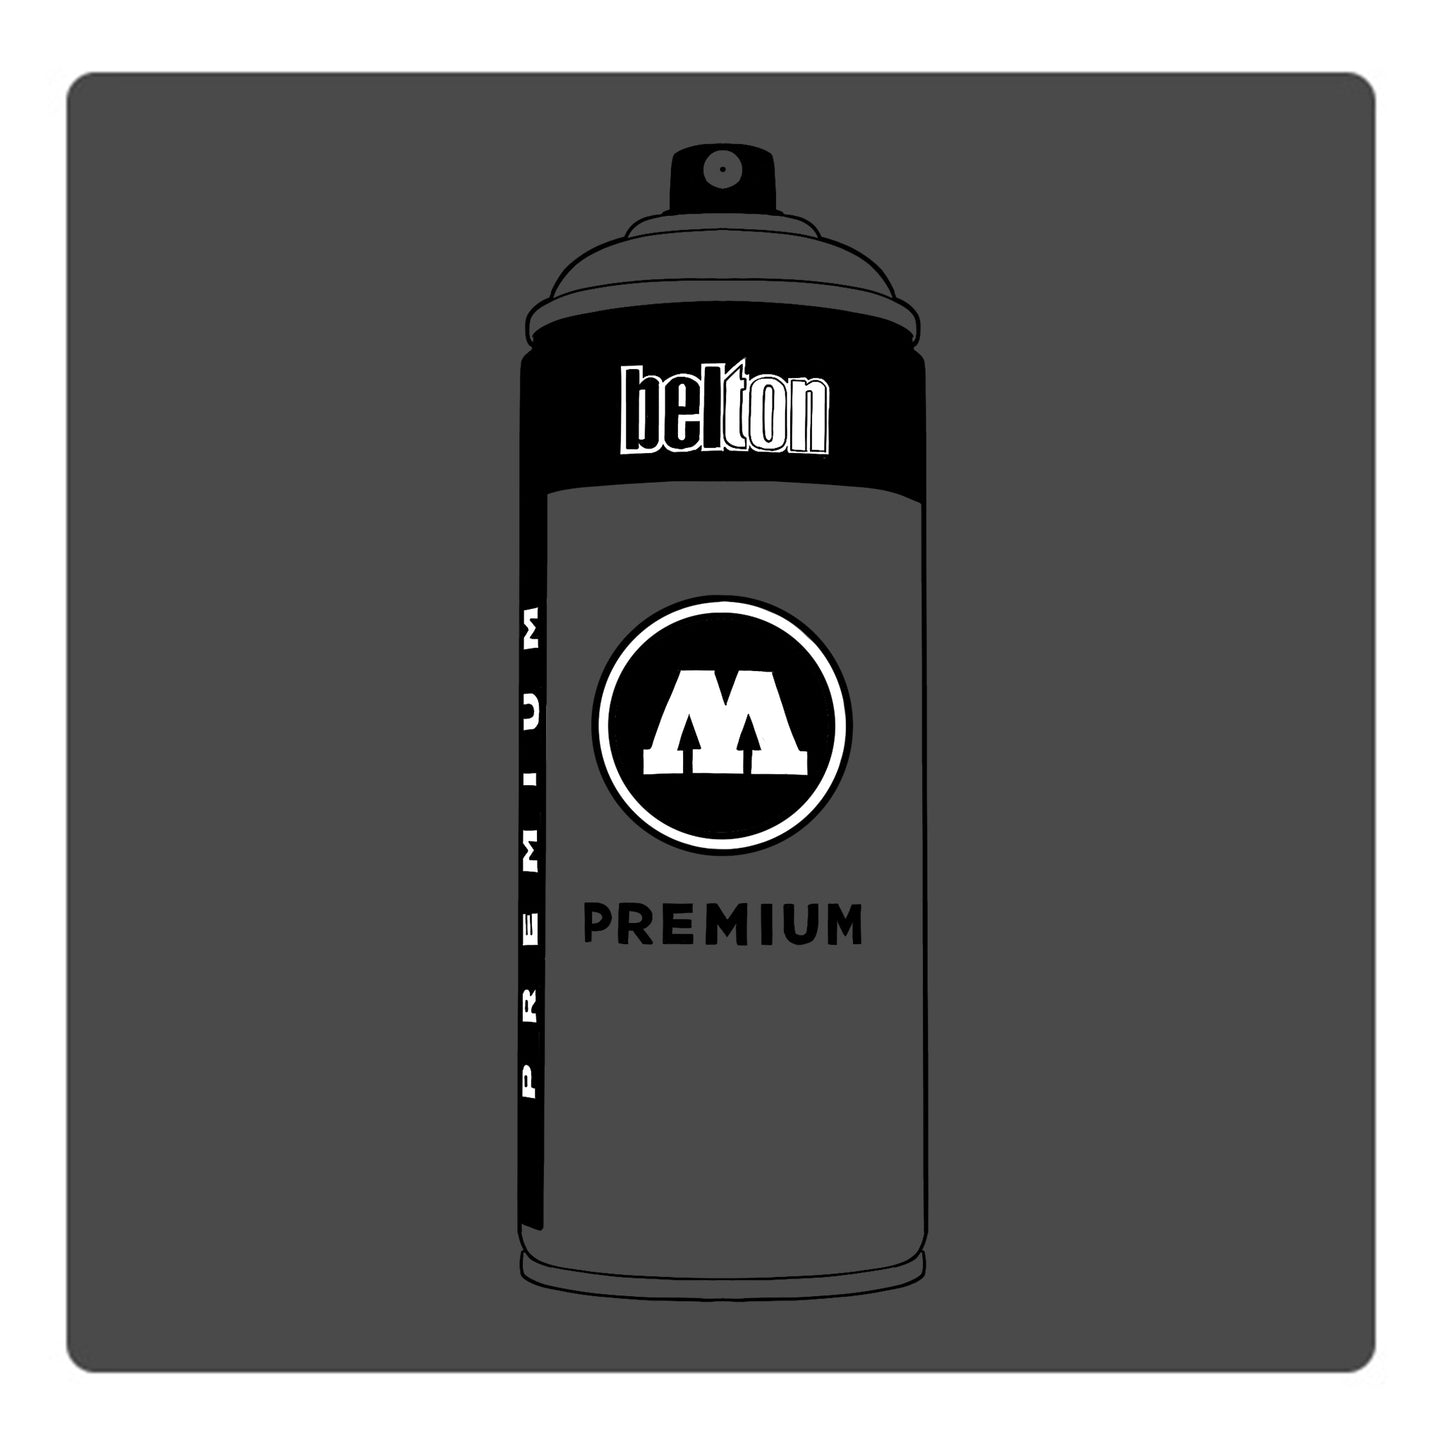 A black outline drawing of a dark grey spray paint can with the words "belton","premium" and the letter"M" written on the face in black and white font. The background is a color swatch of the same dark grey with a white border